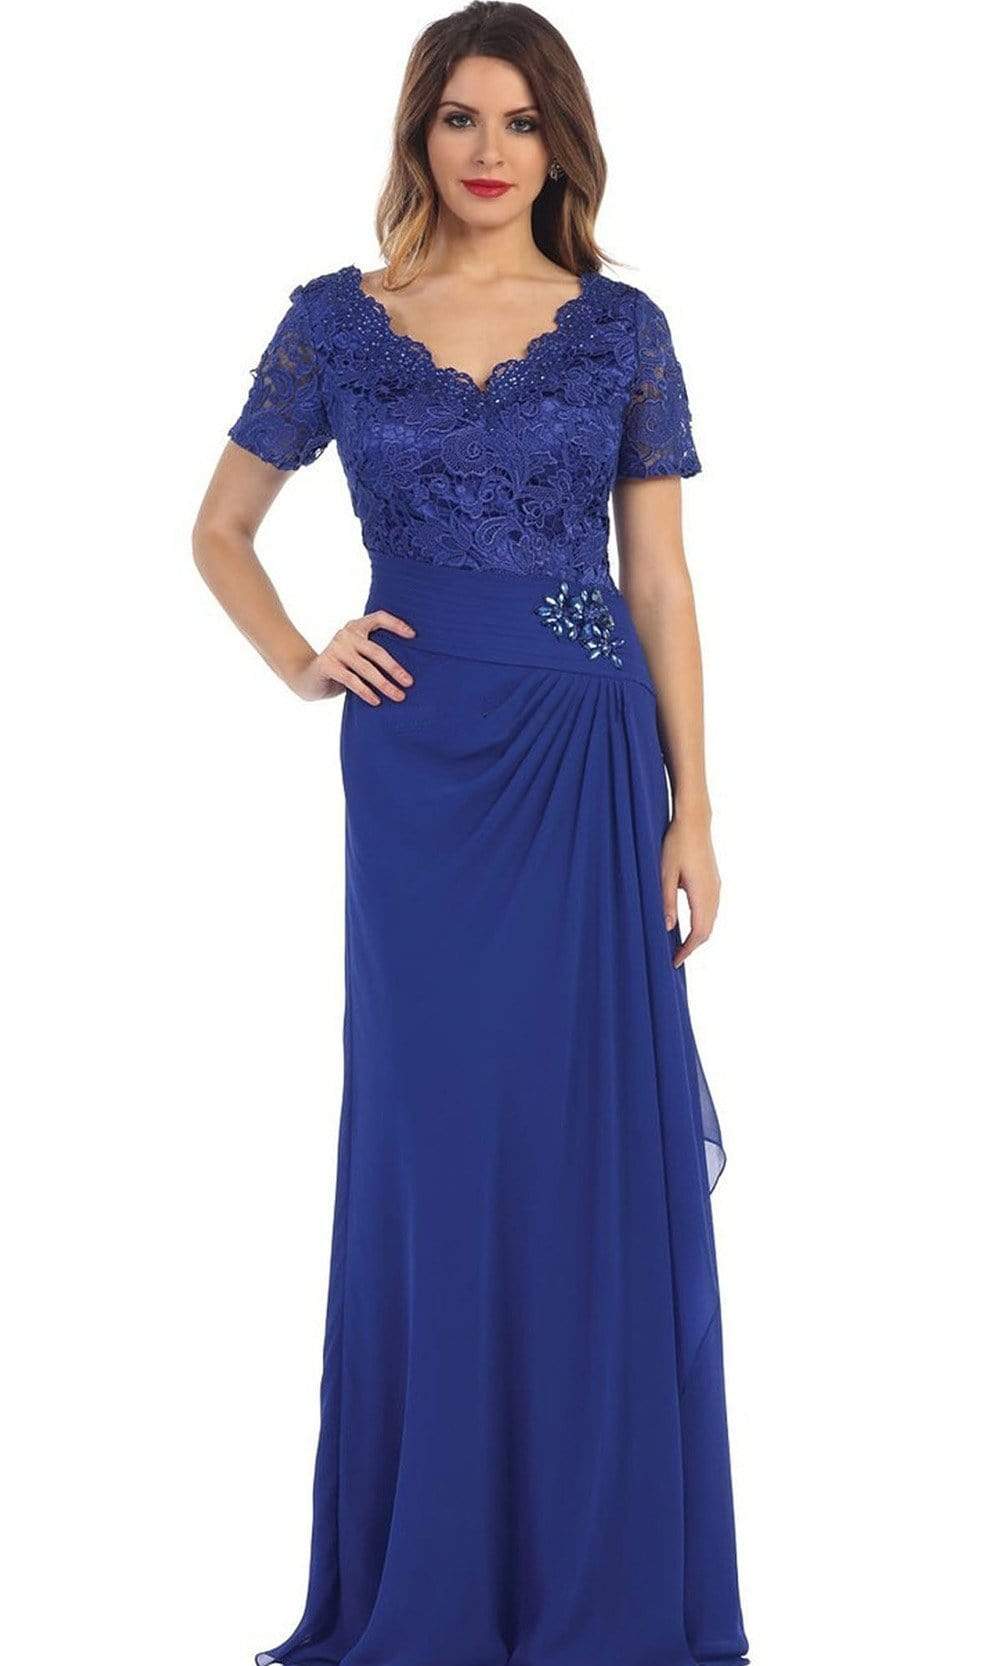 May Queen - Lace Scalloped V-neck Sheath Evening Dress
